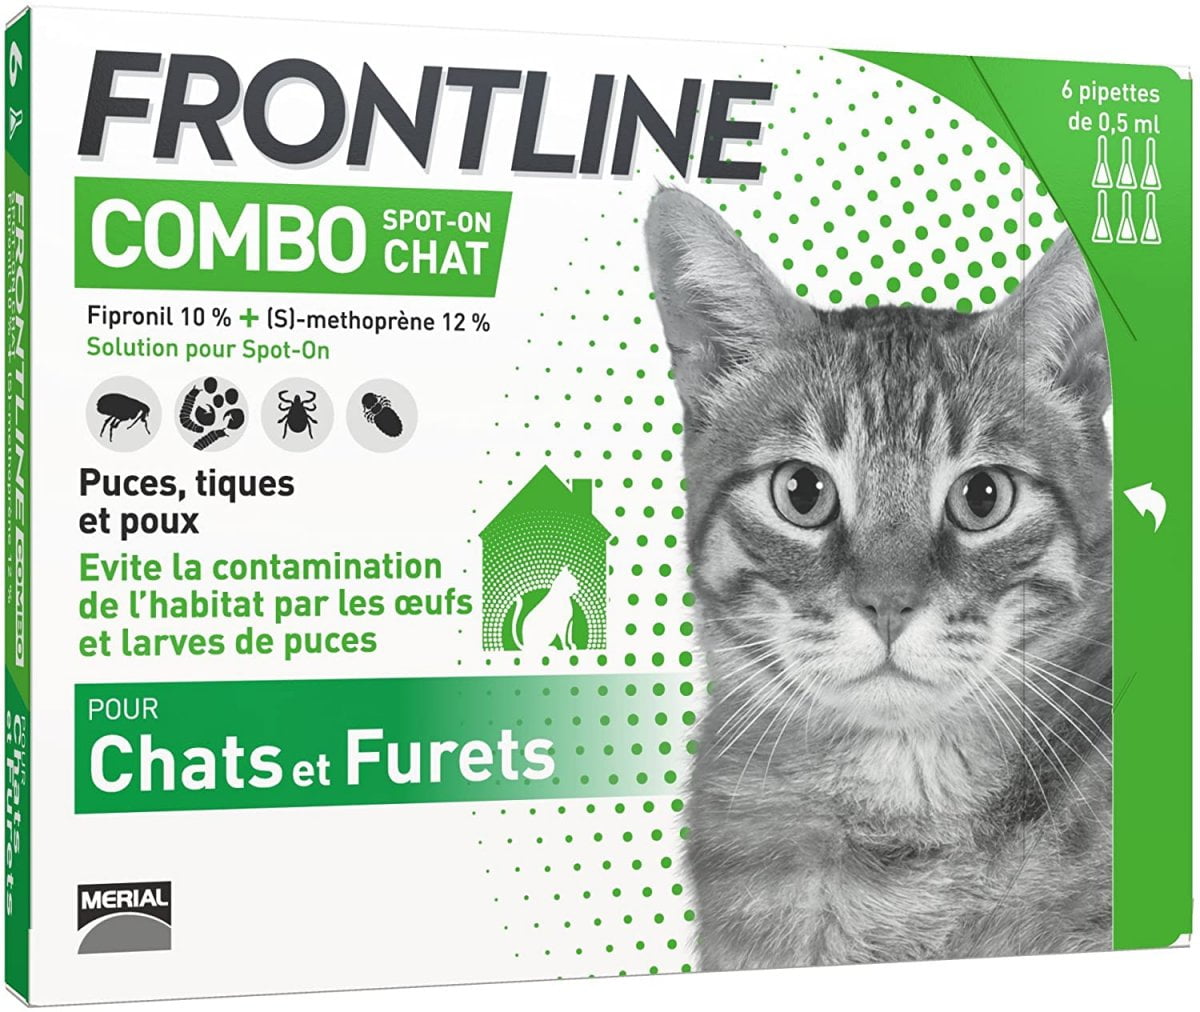  Pack 6 Pipettes Anti-puces pour chat - Frontline Combo Spot-on